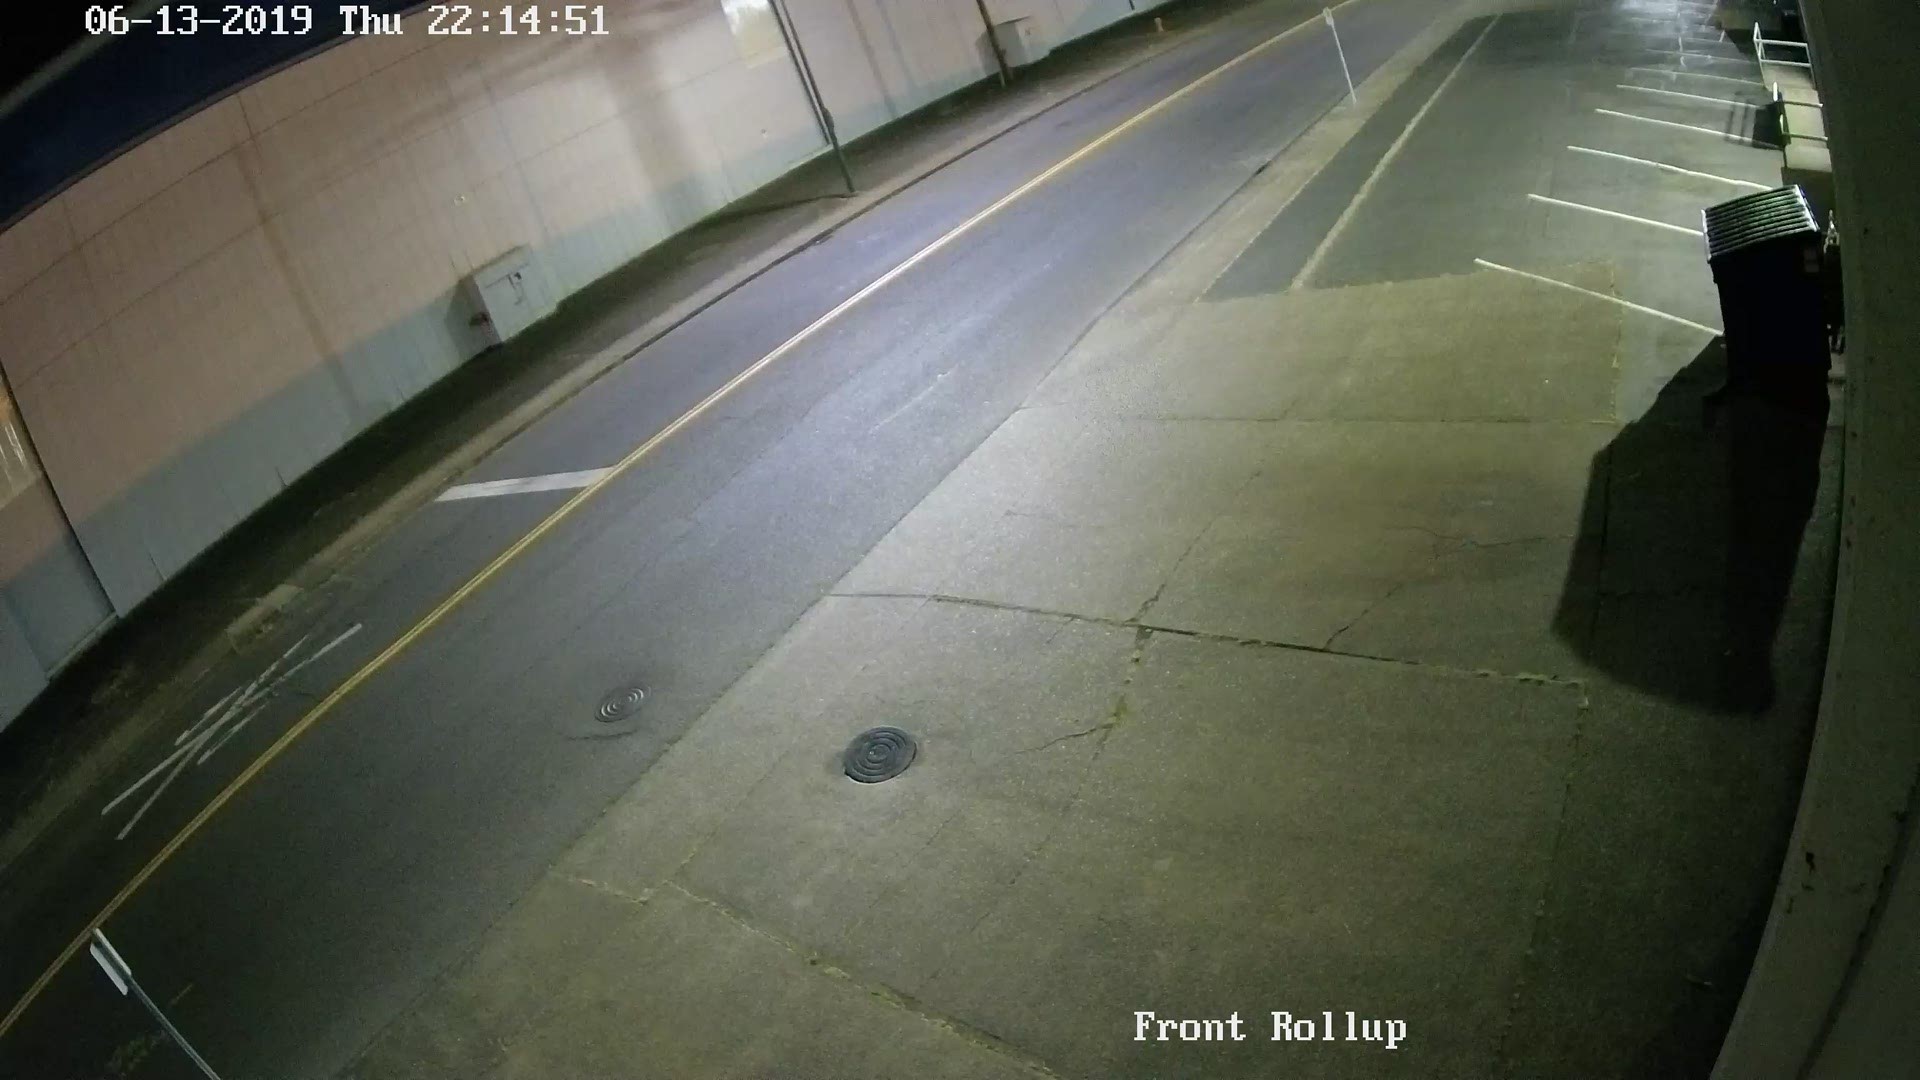 Three people were caught on video popping out of a manhole cover in Northwest Portland on June 13.